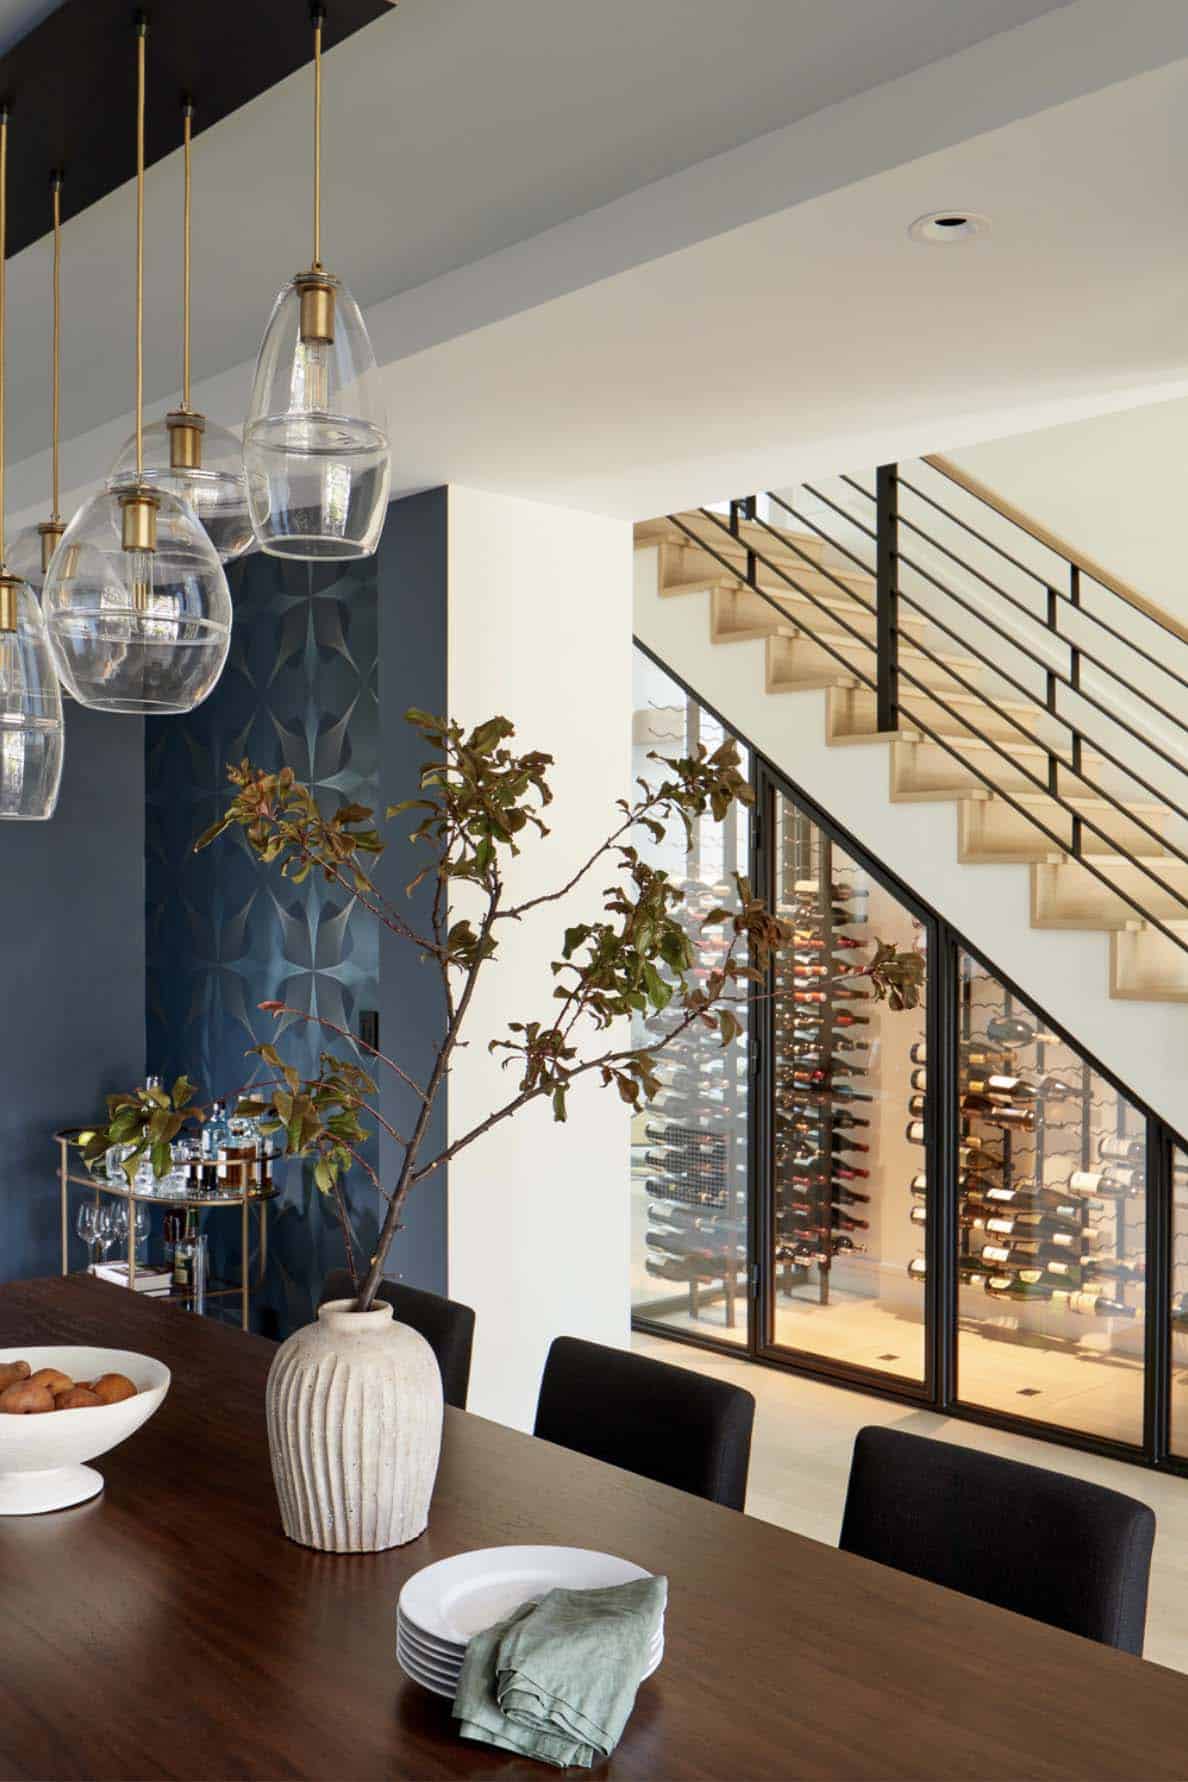 transitional dining room with a view of the staircase